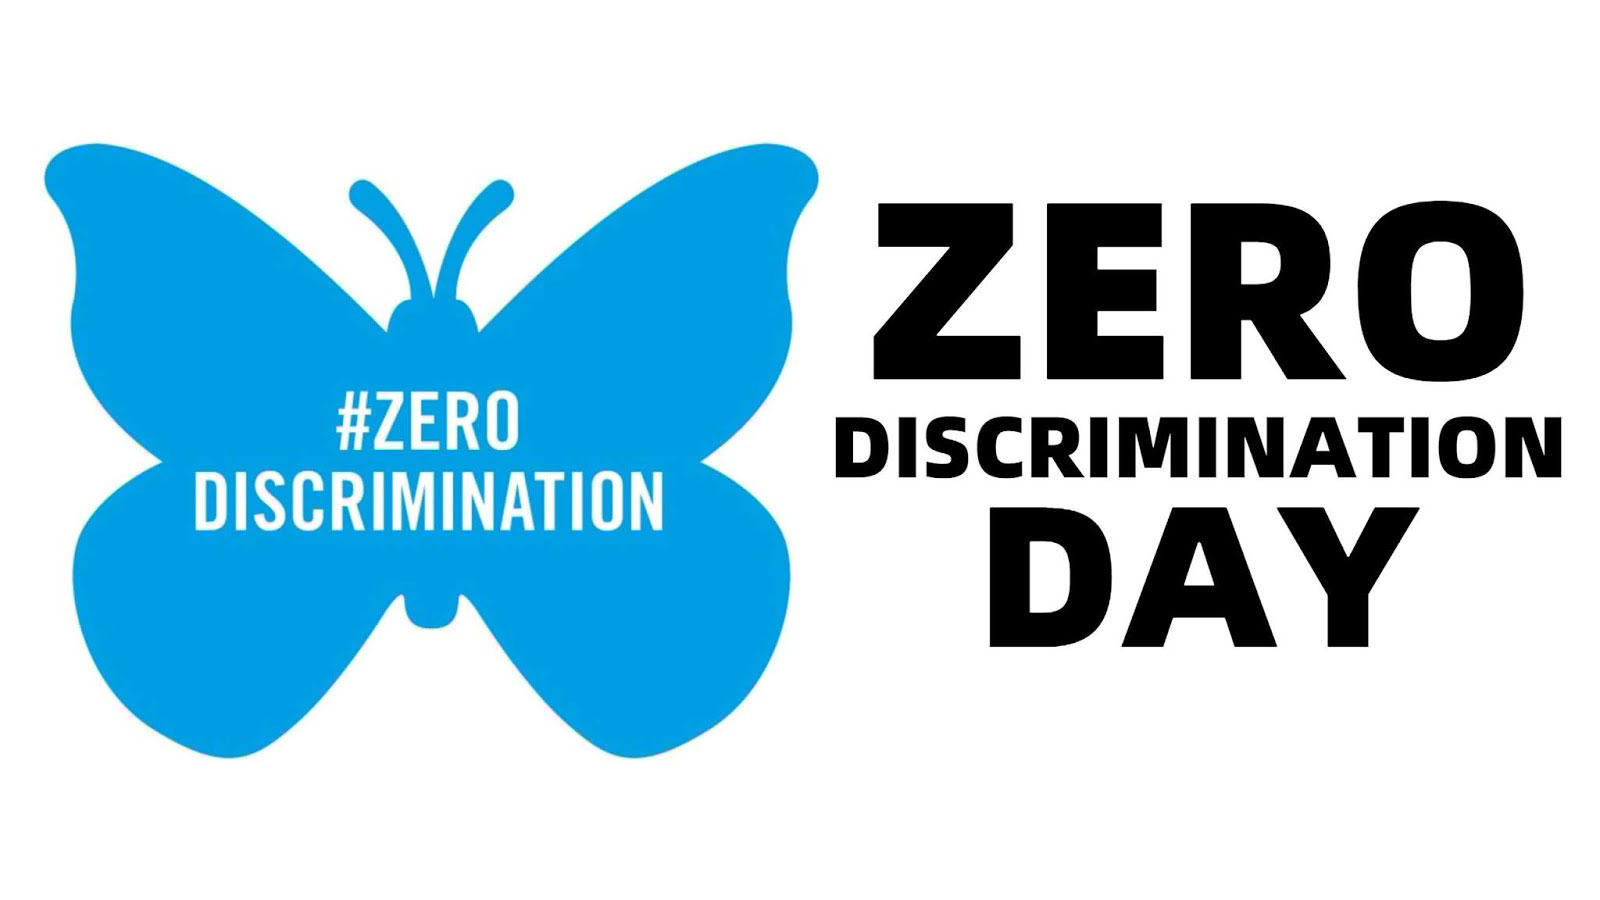 Zero-Discrimination-Day-is-on-01-March-